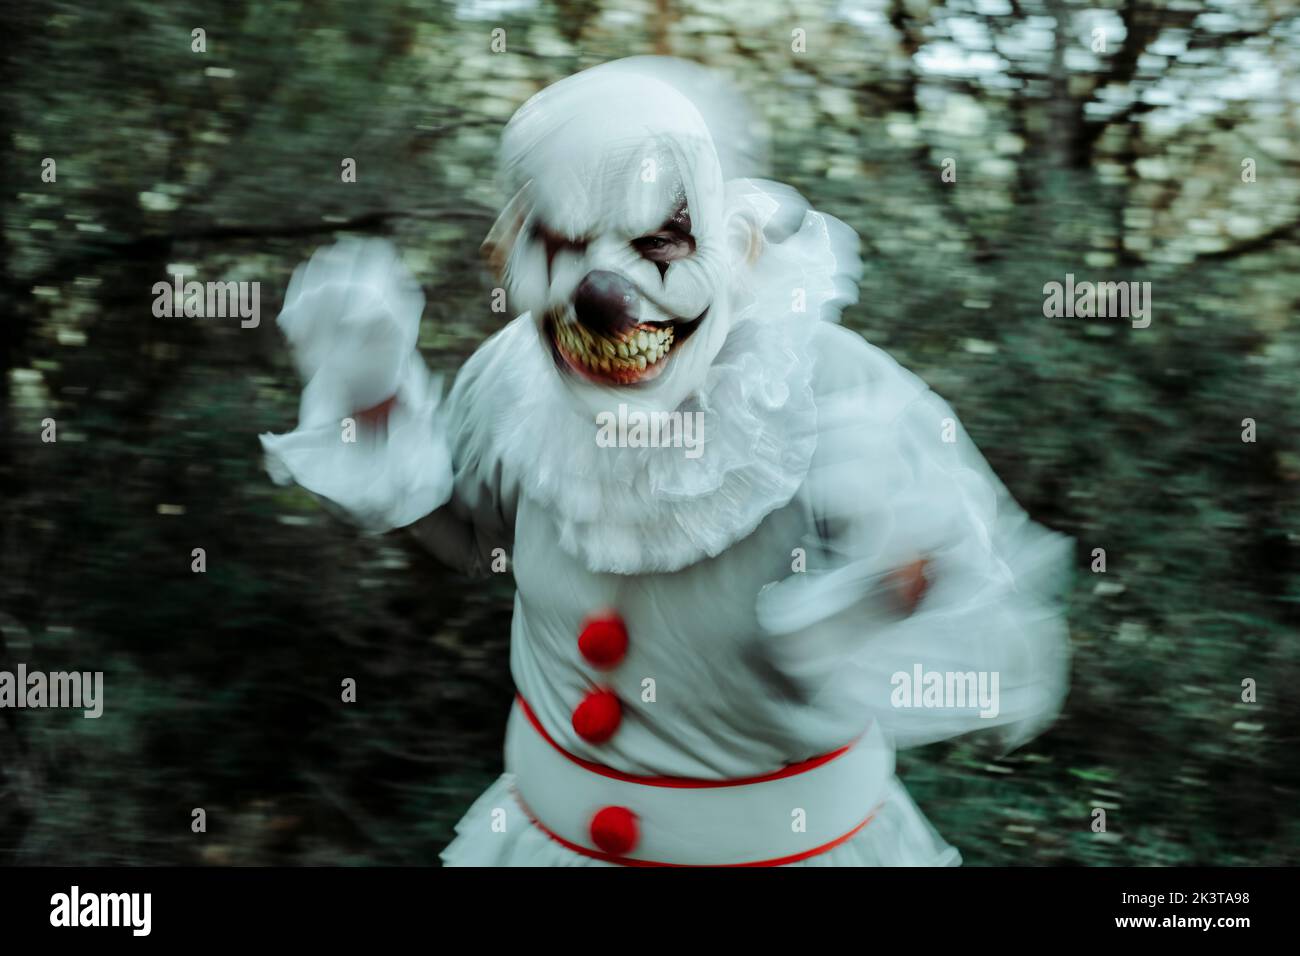 closeup of a blurry creepy evil clown, wearing a gray costume with ruffles and red pom-poms, and a white ruff, in motion in the woods at dusk, starrin Stock Photo